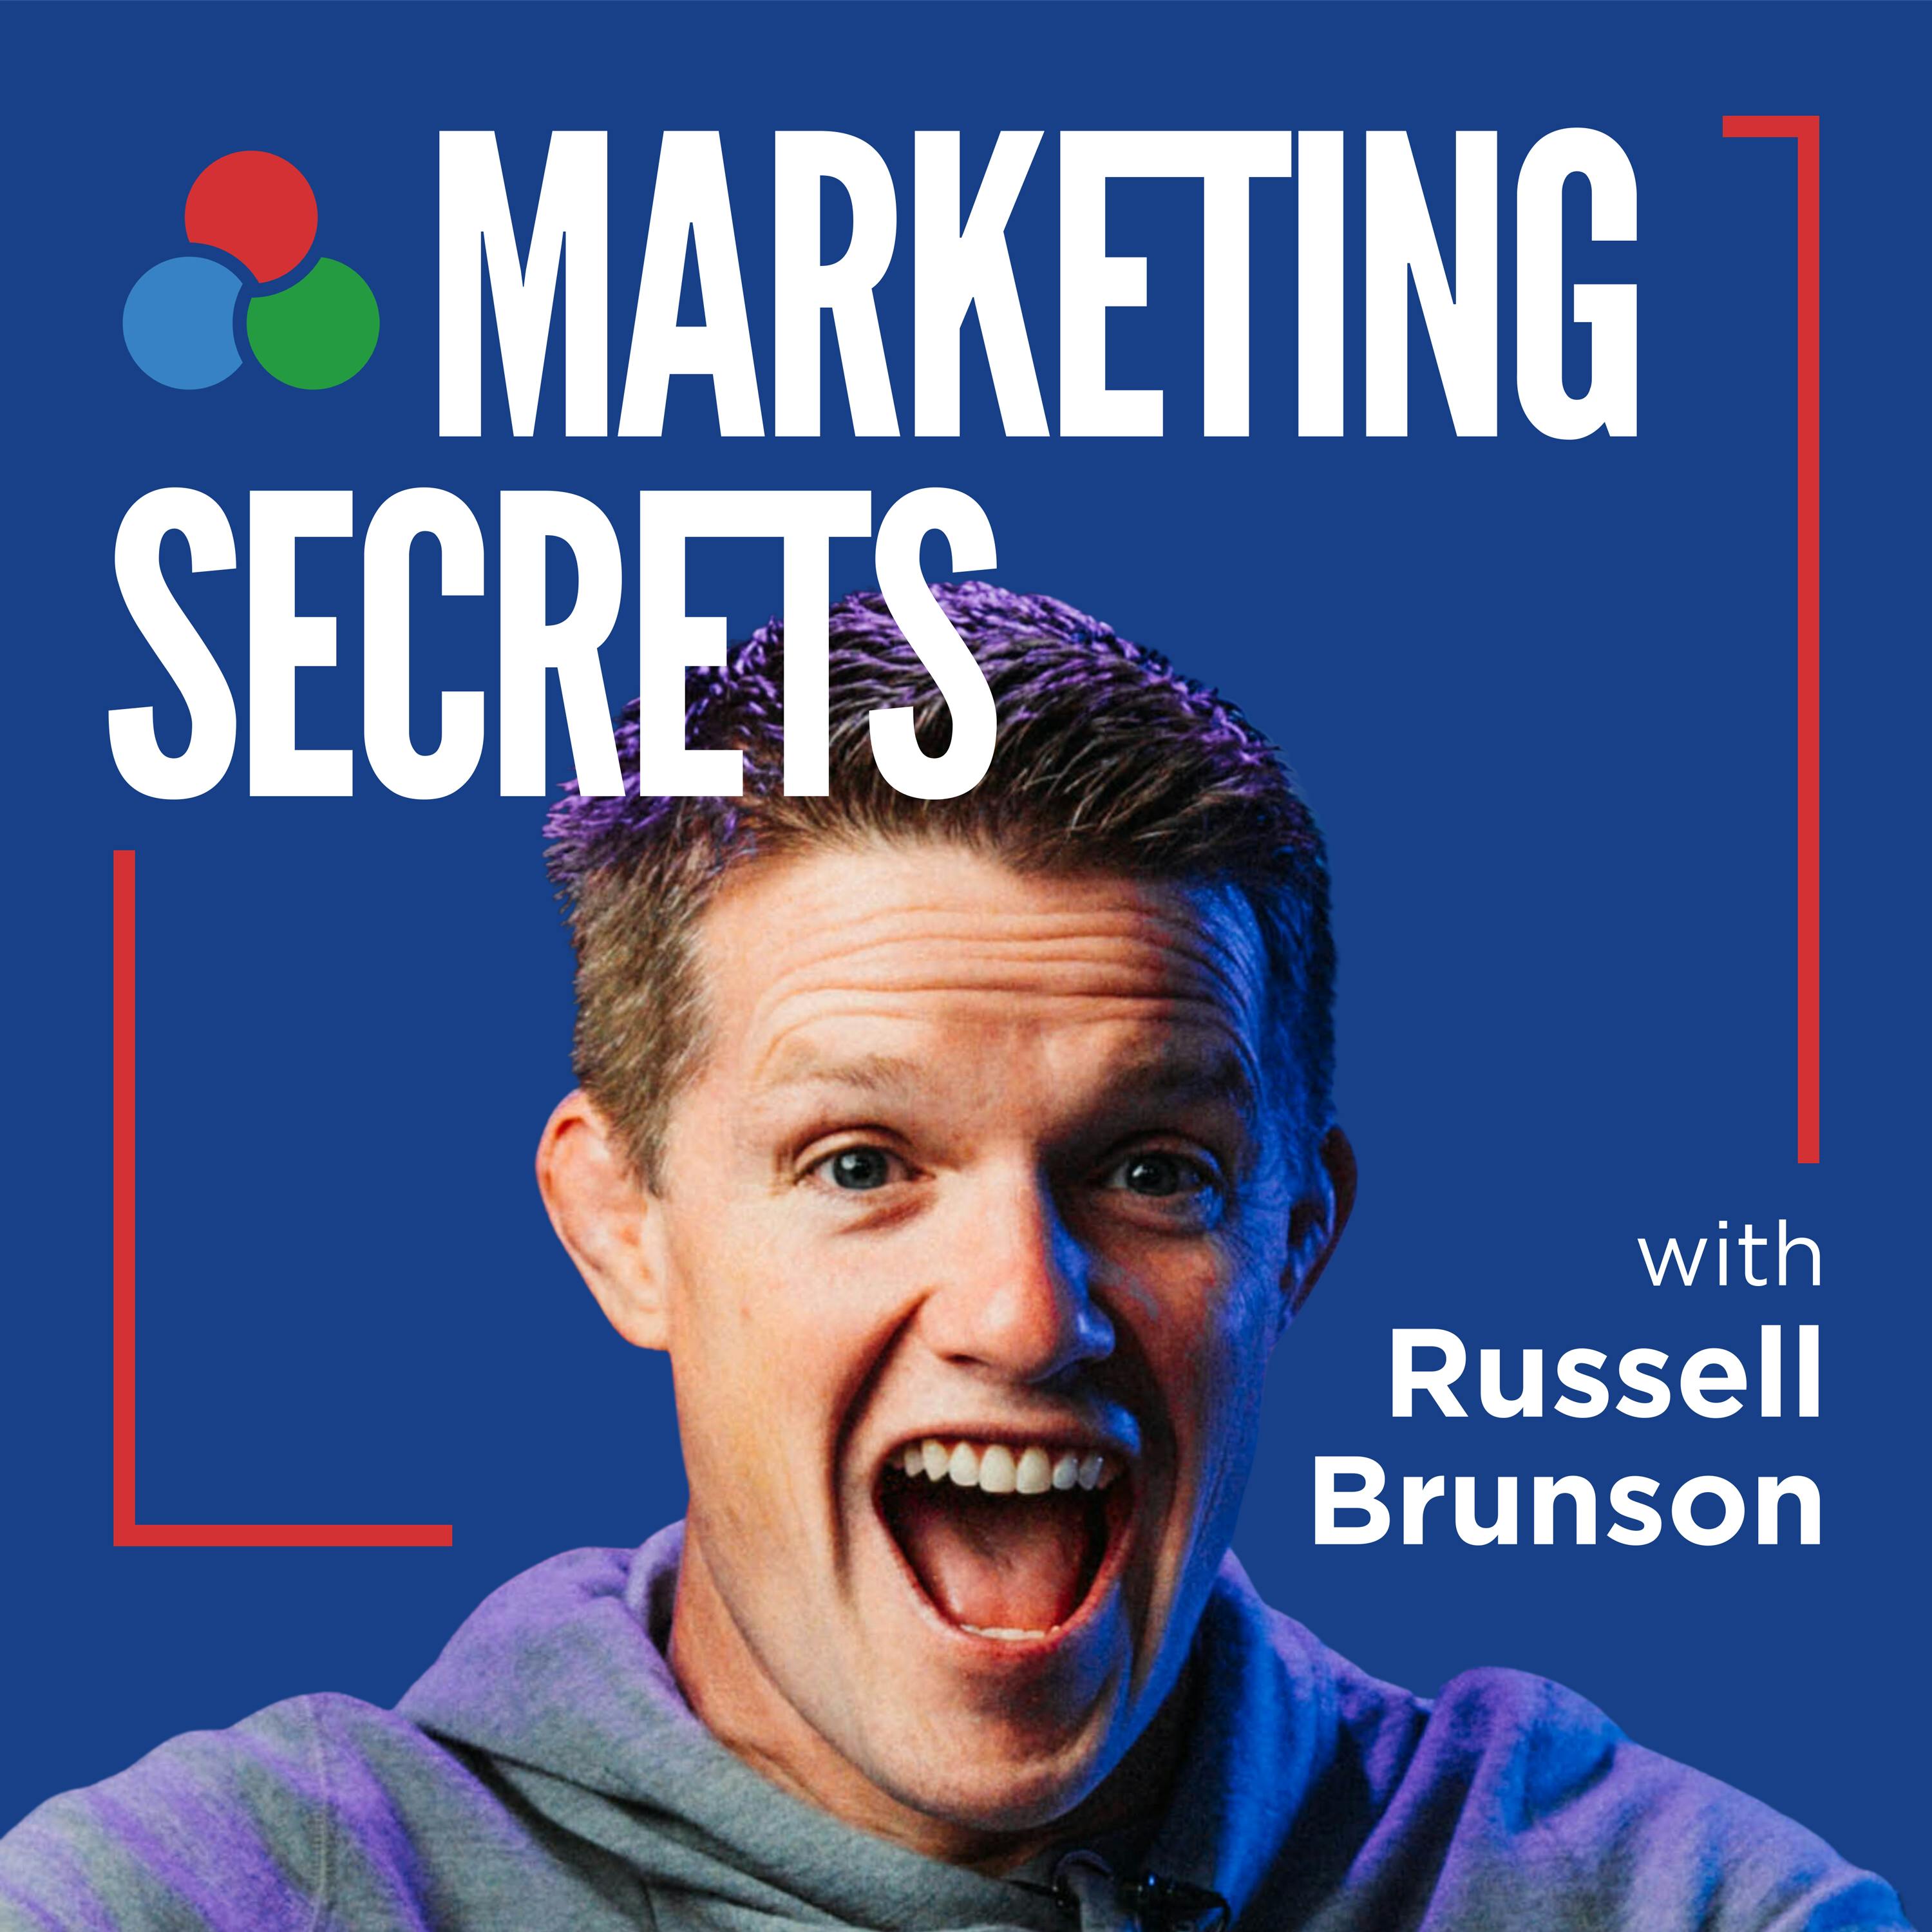 The Marketing Secrets Show by Russell Brunson